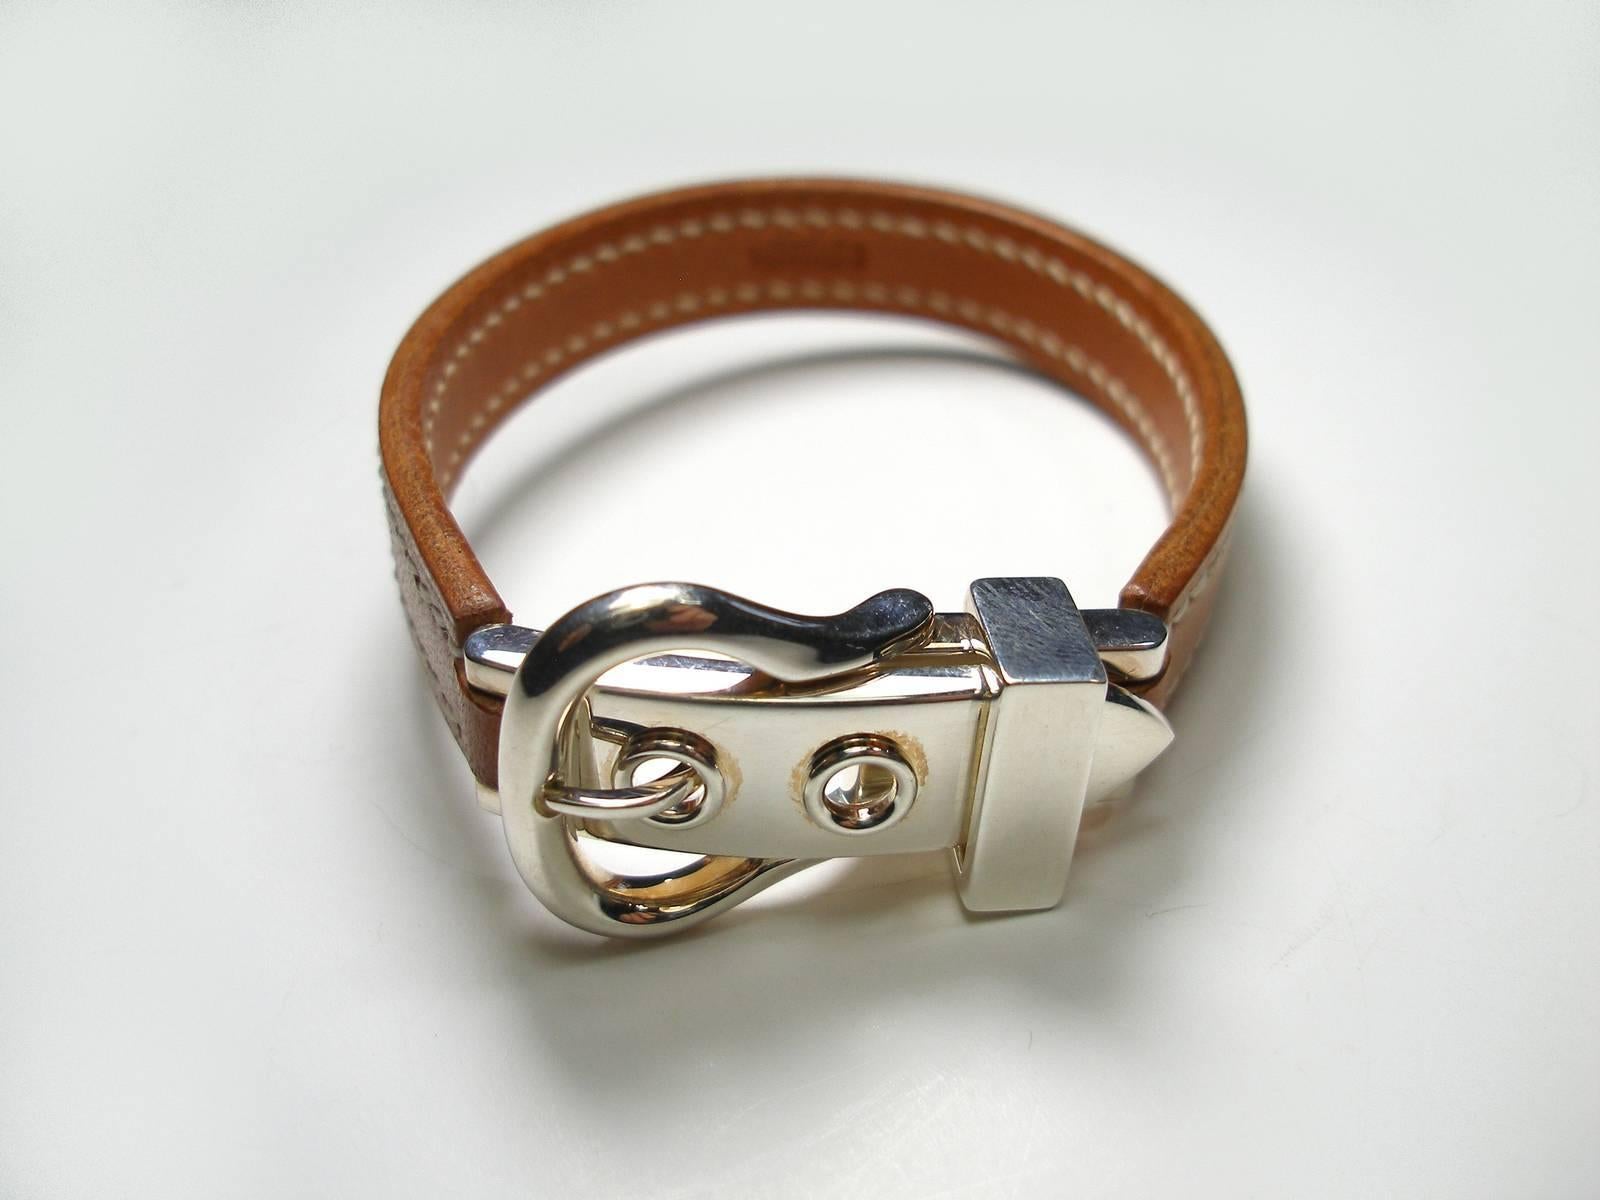 Hermès Bracelet Unisex
But this one's a big size ( for men ) 
Collection sold out in shop 
Made in France 
For a wrist of 18 and 19 cm gold 
2 attachment options
Width 1.2 cm 
Production I in the square / Year 2005 
Very Good condition , please look